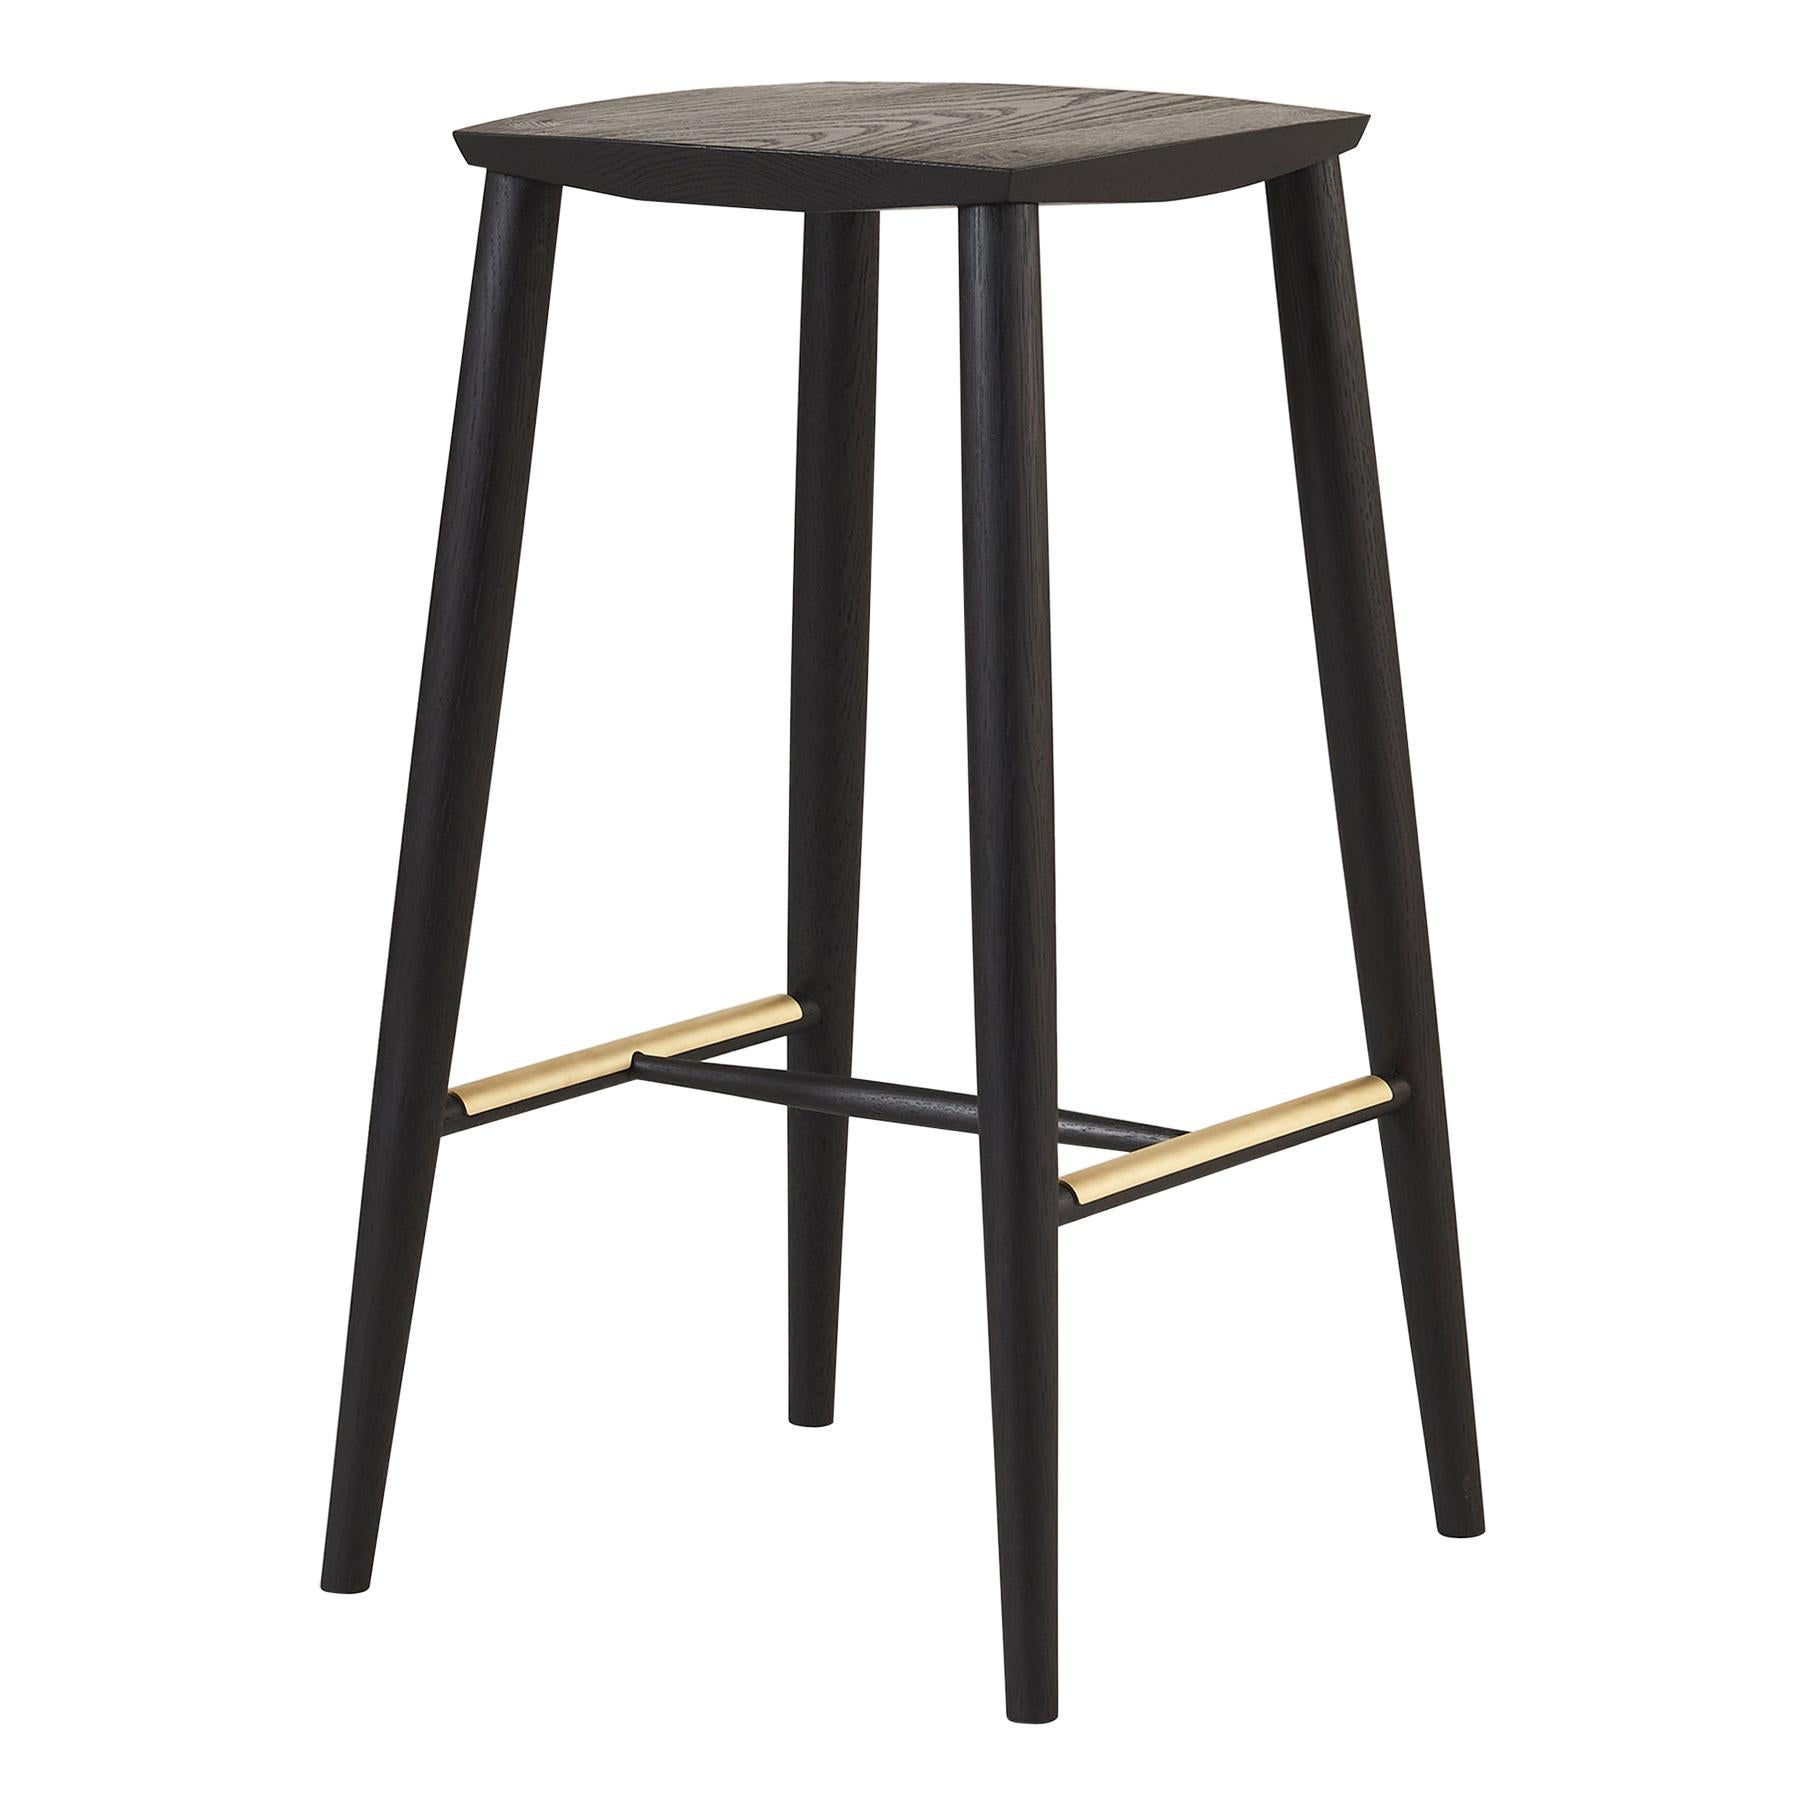 Minimal Black Bar Stool with Brass Foot Rests by Coolican & Company